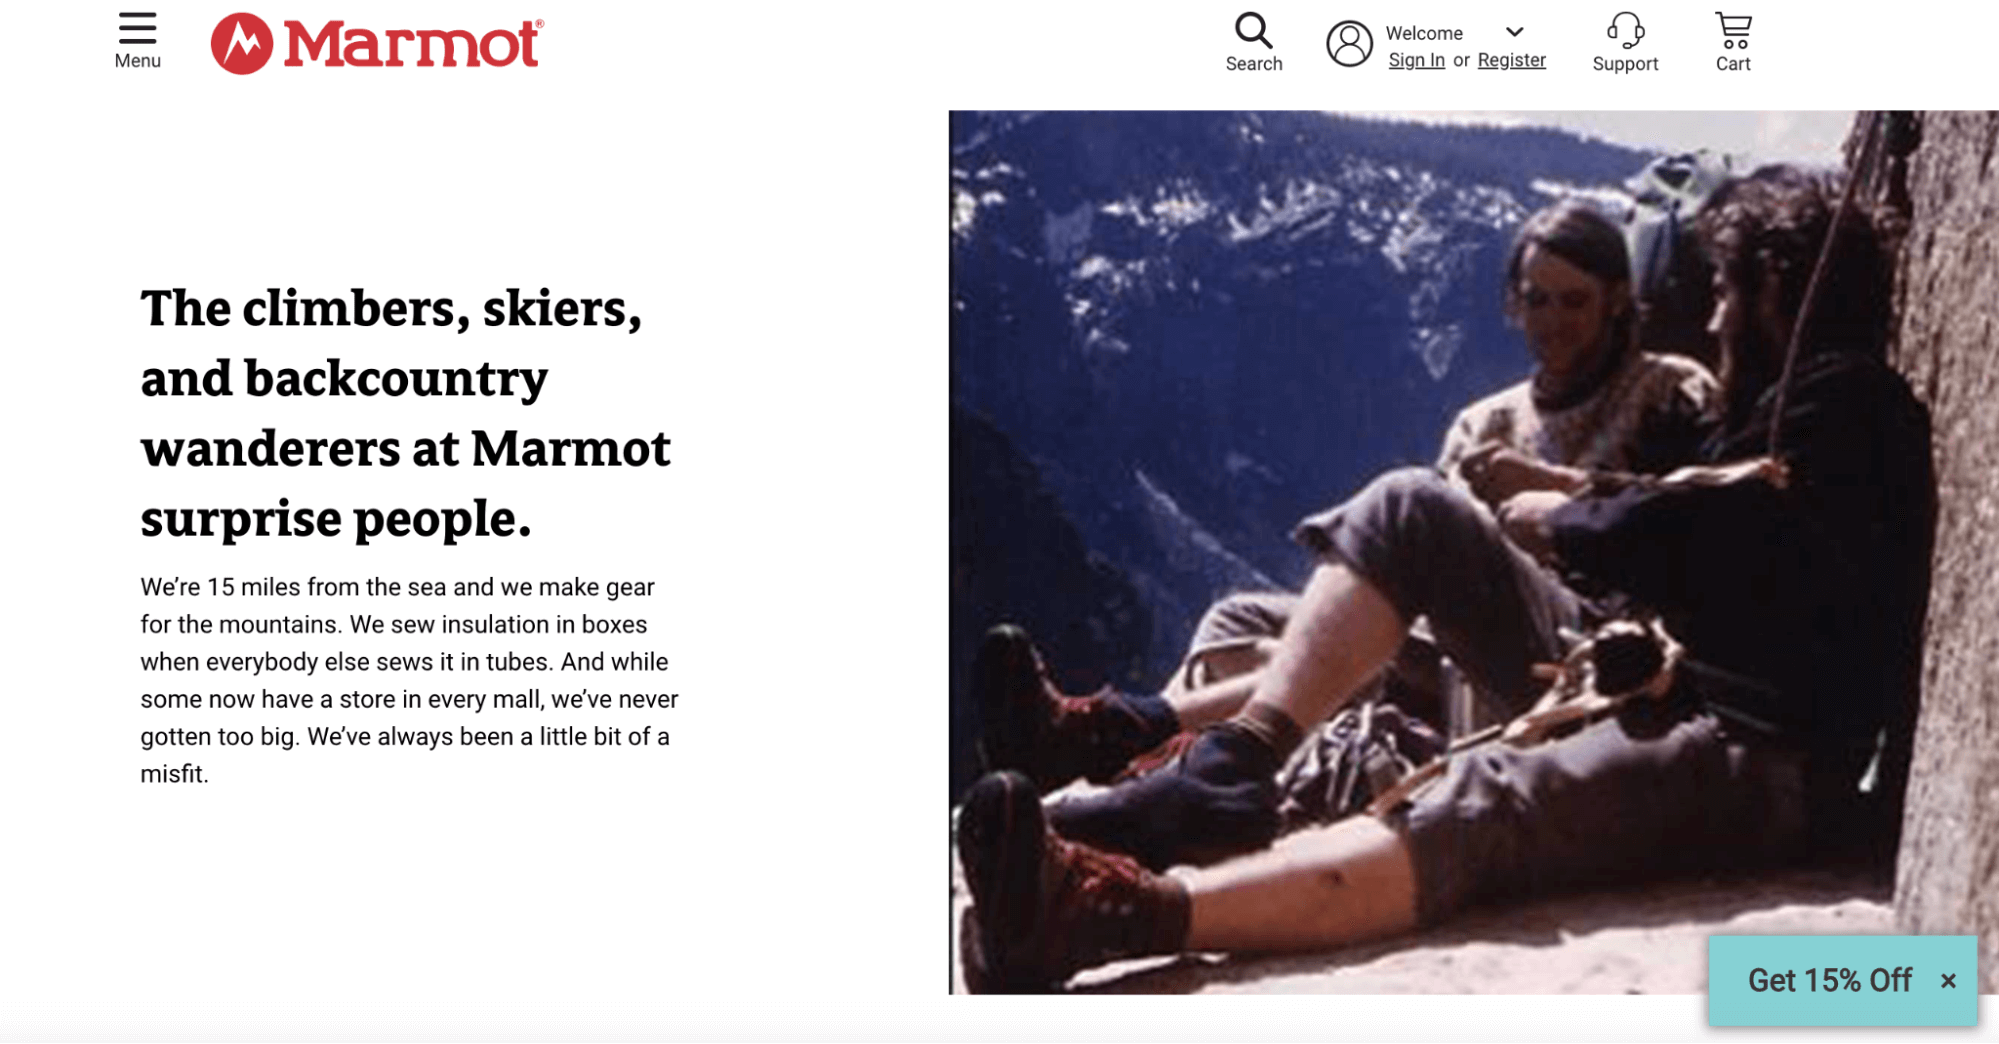 The image displays the “About” page of Marmot with an original photo of the two founders resting along a mountainside in Alaska. The page describes the innovative approach Marmot brings to the outdoor gear market.